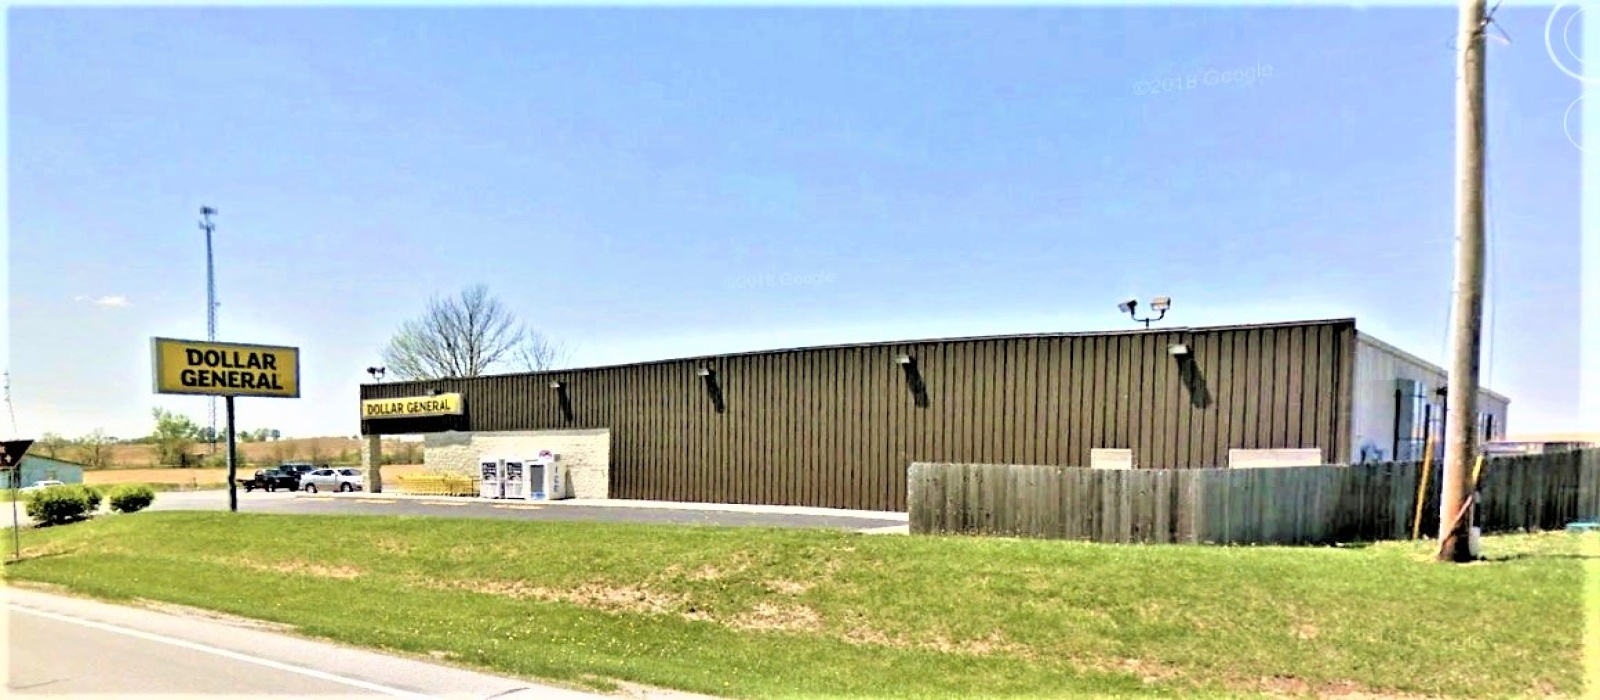 11280 W US 36, Losantville, Indiana 47354, ,Retail,For Sale,11280 W US 36,1060